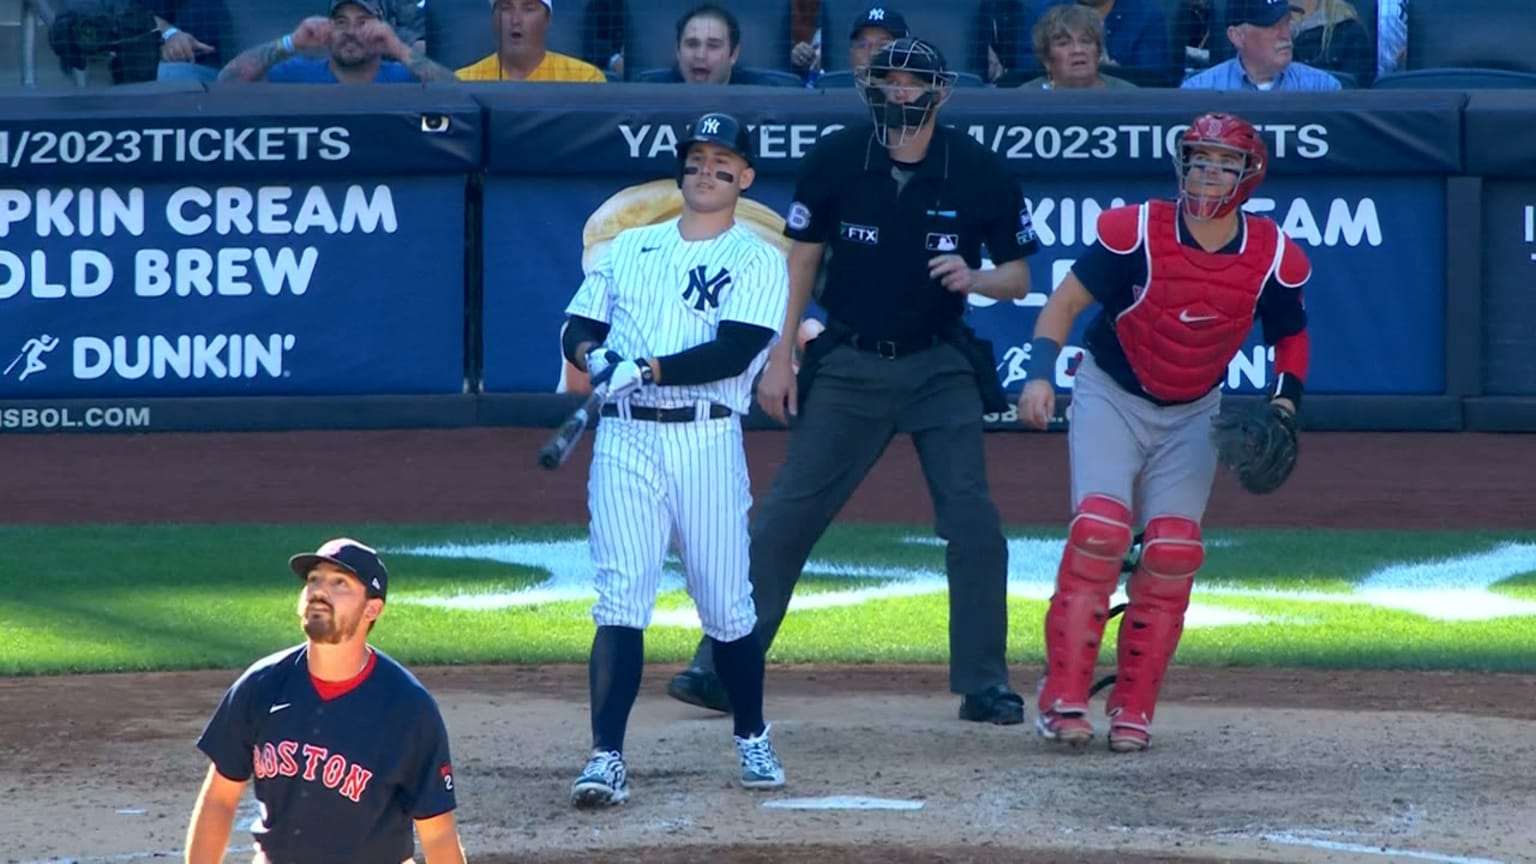 WATCH: Yankees' Anthony Rizzo becomes MLB home run leader with